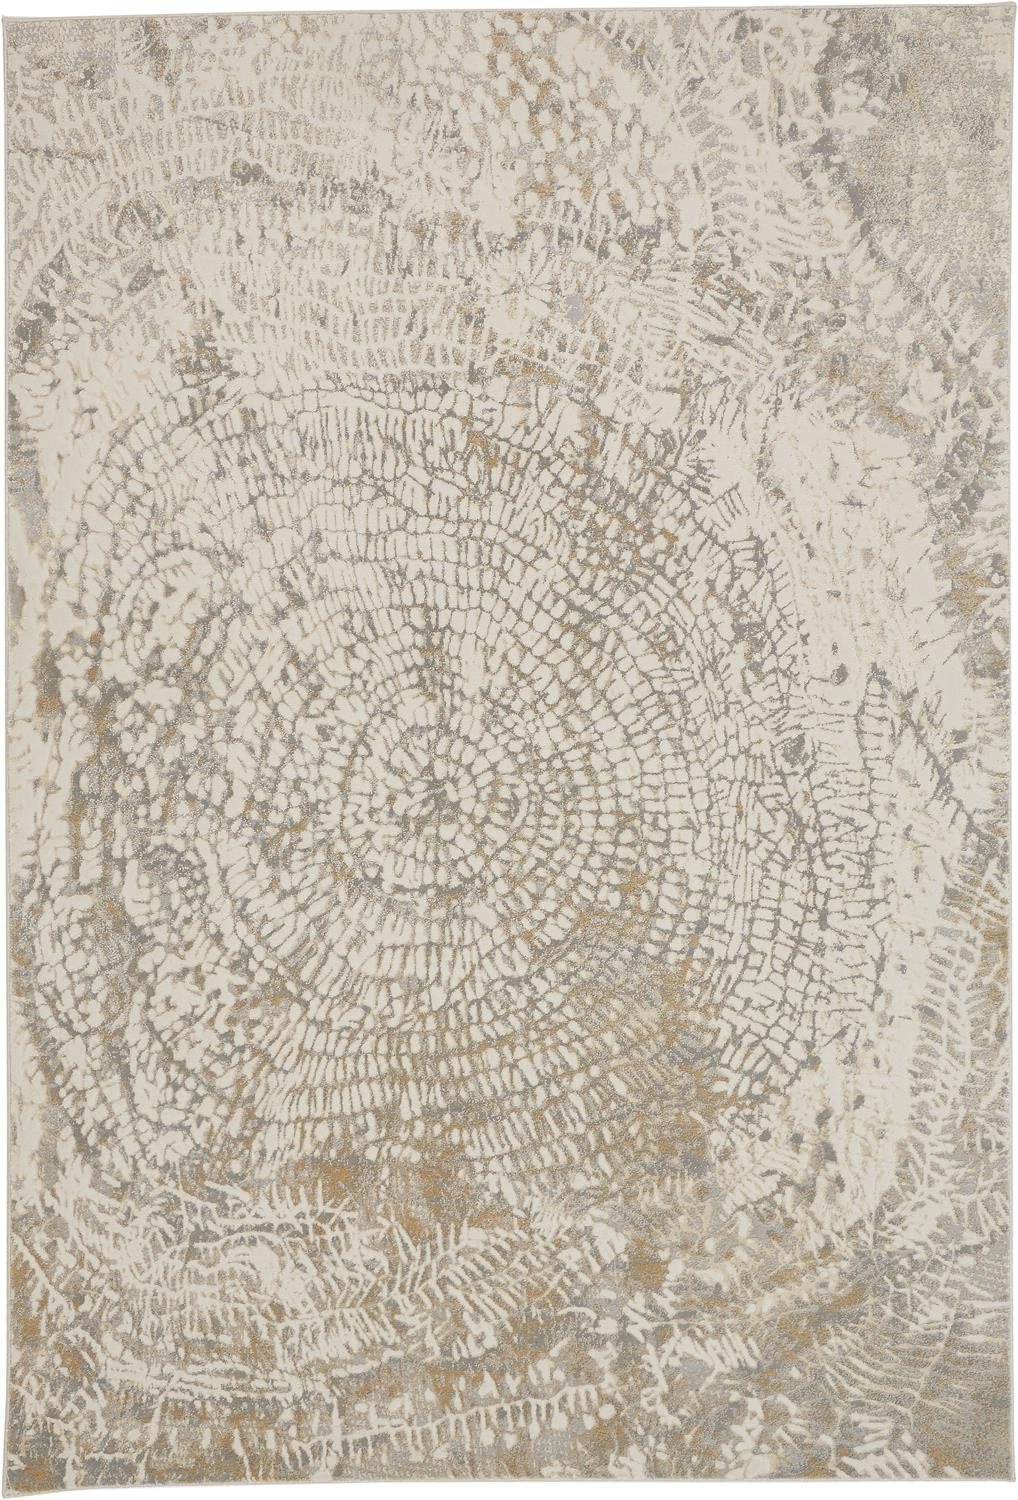 8' X 10' Ivory Tan And Gray Abstract Area Rug-514697-1